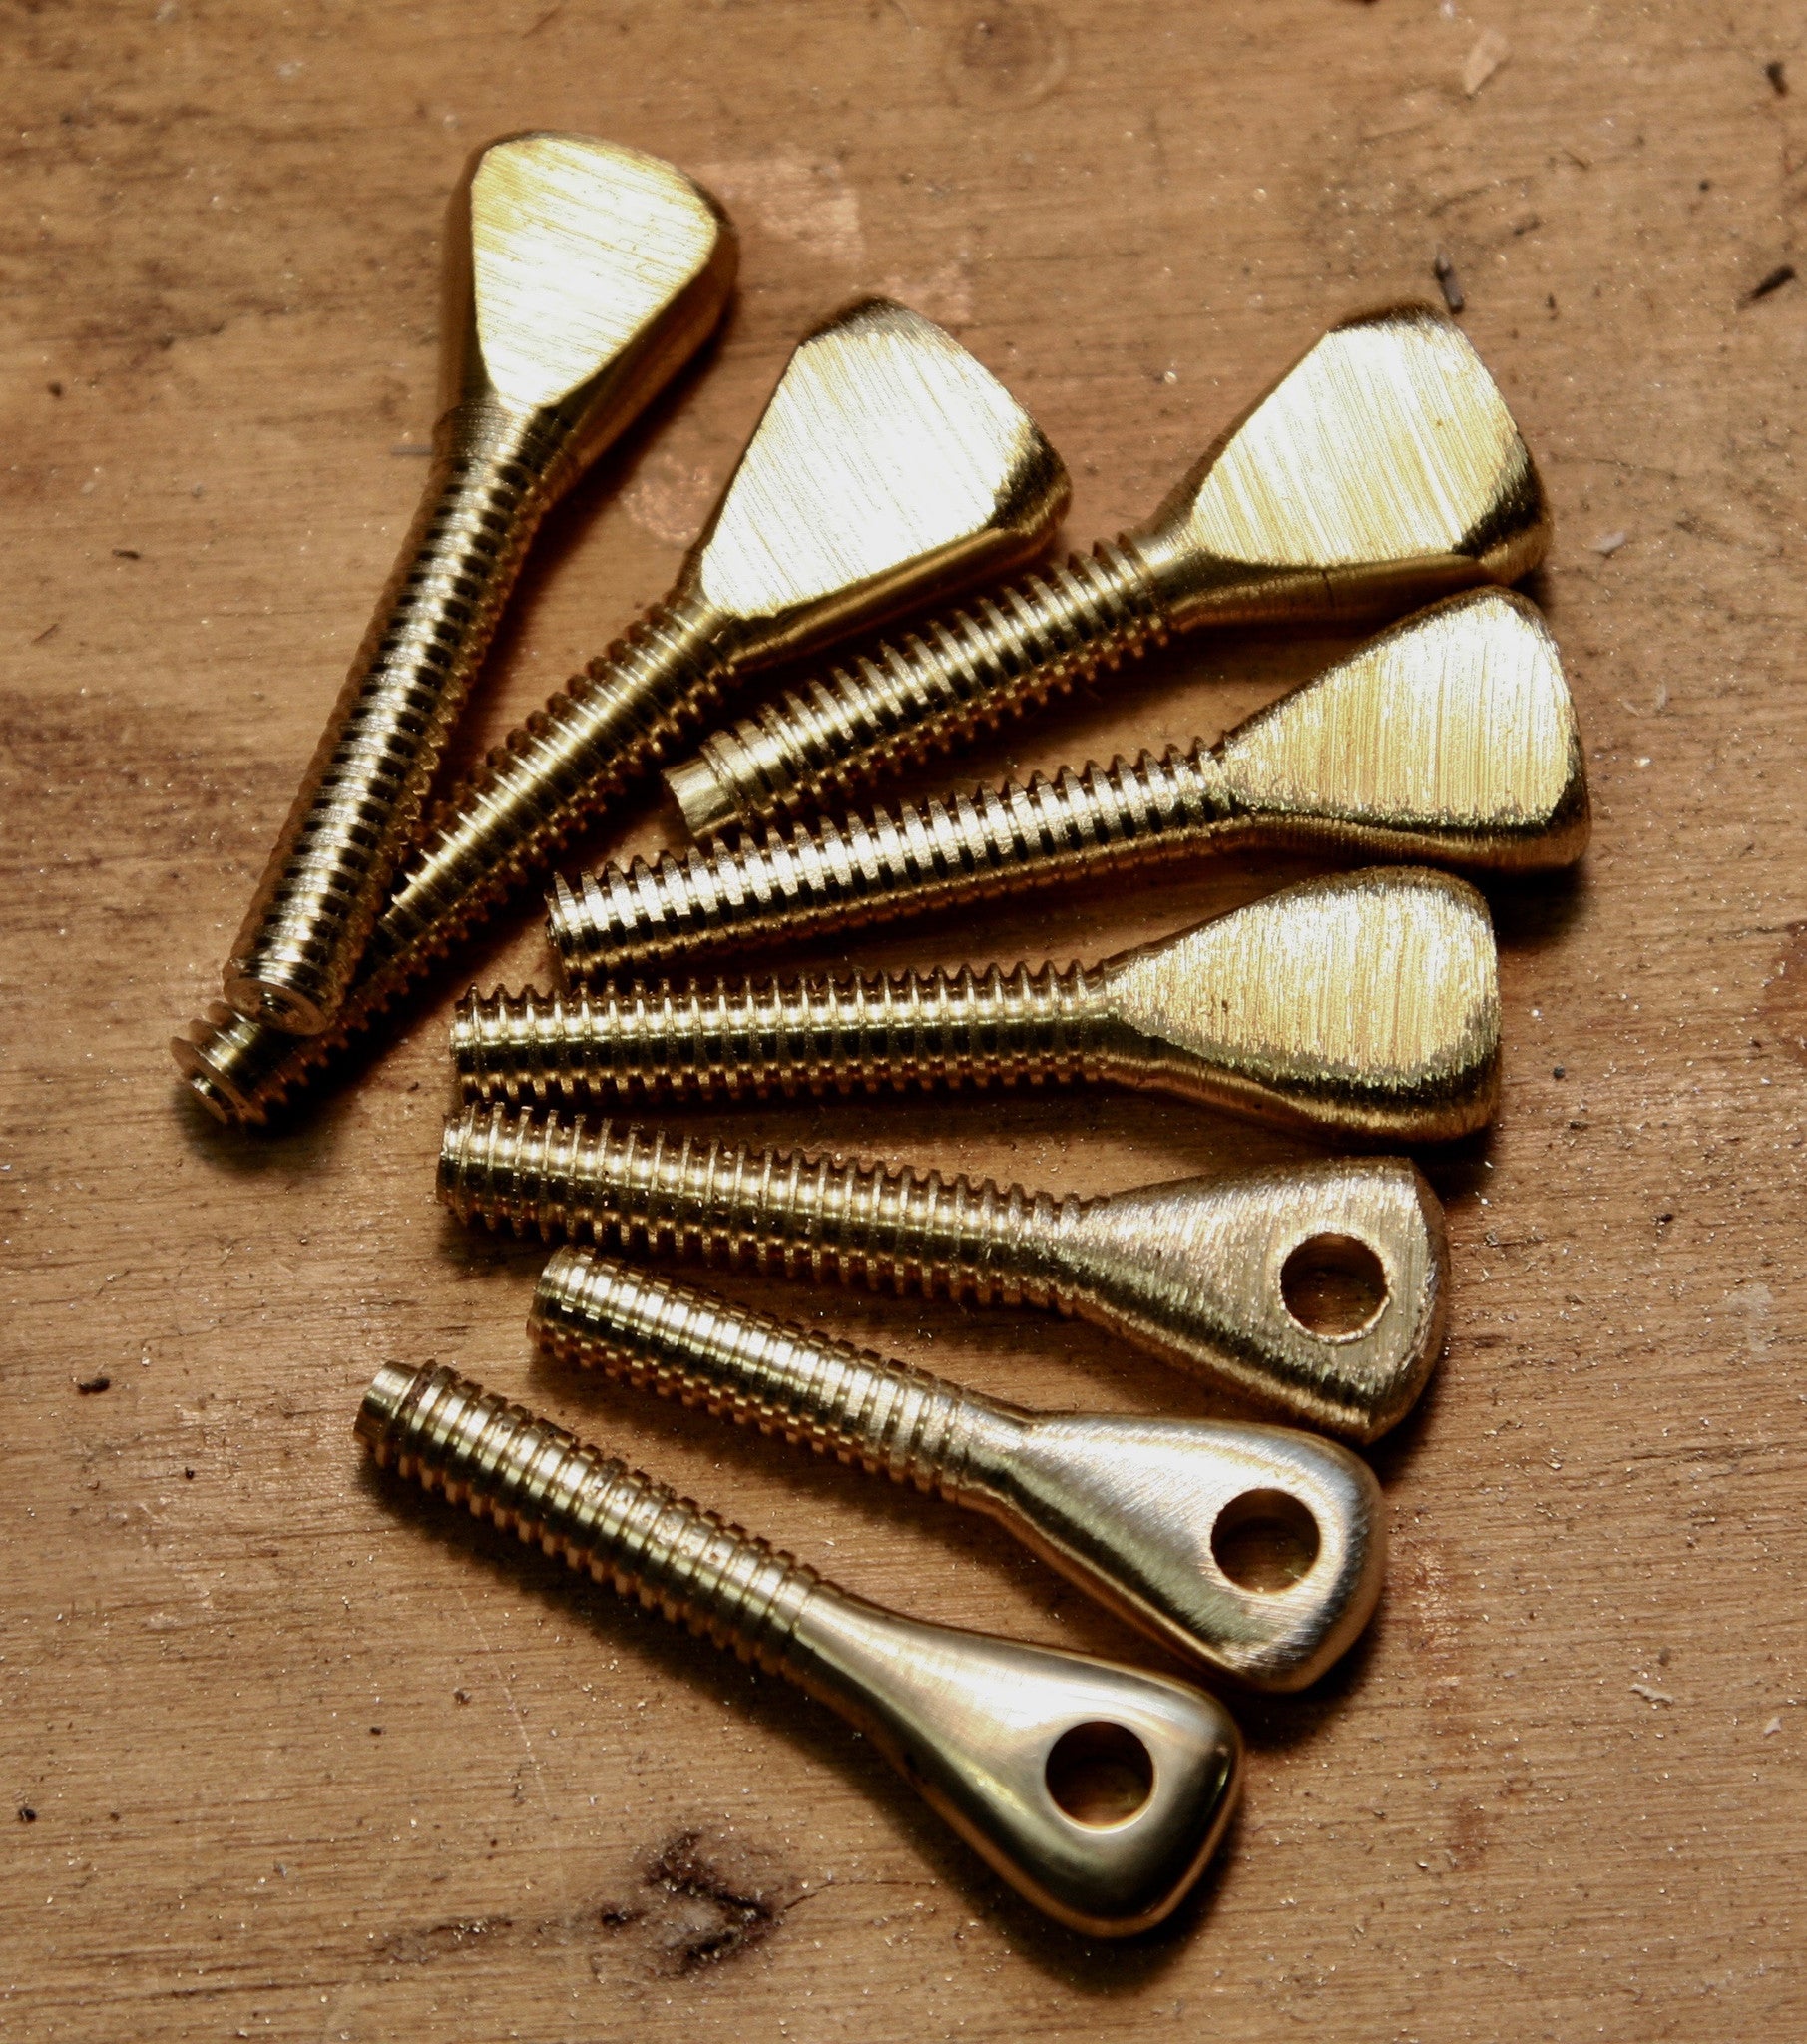 Brass eyes cut from brass rod, shown in the steps of manifactoring.